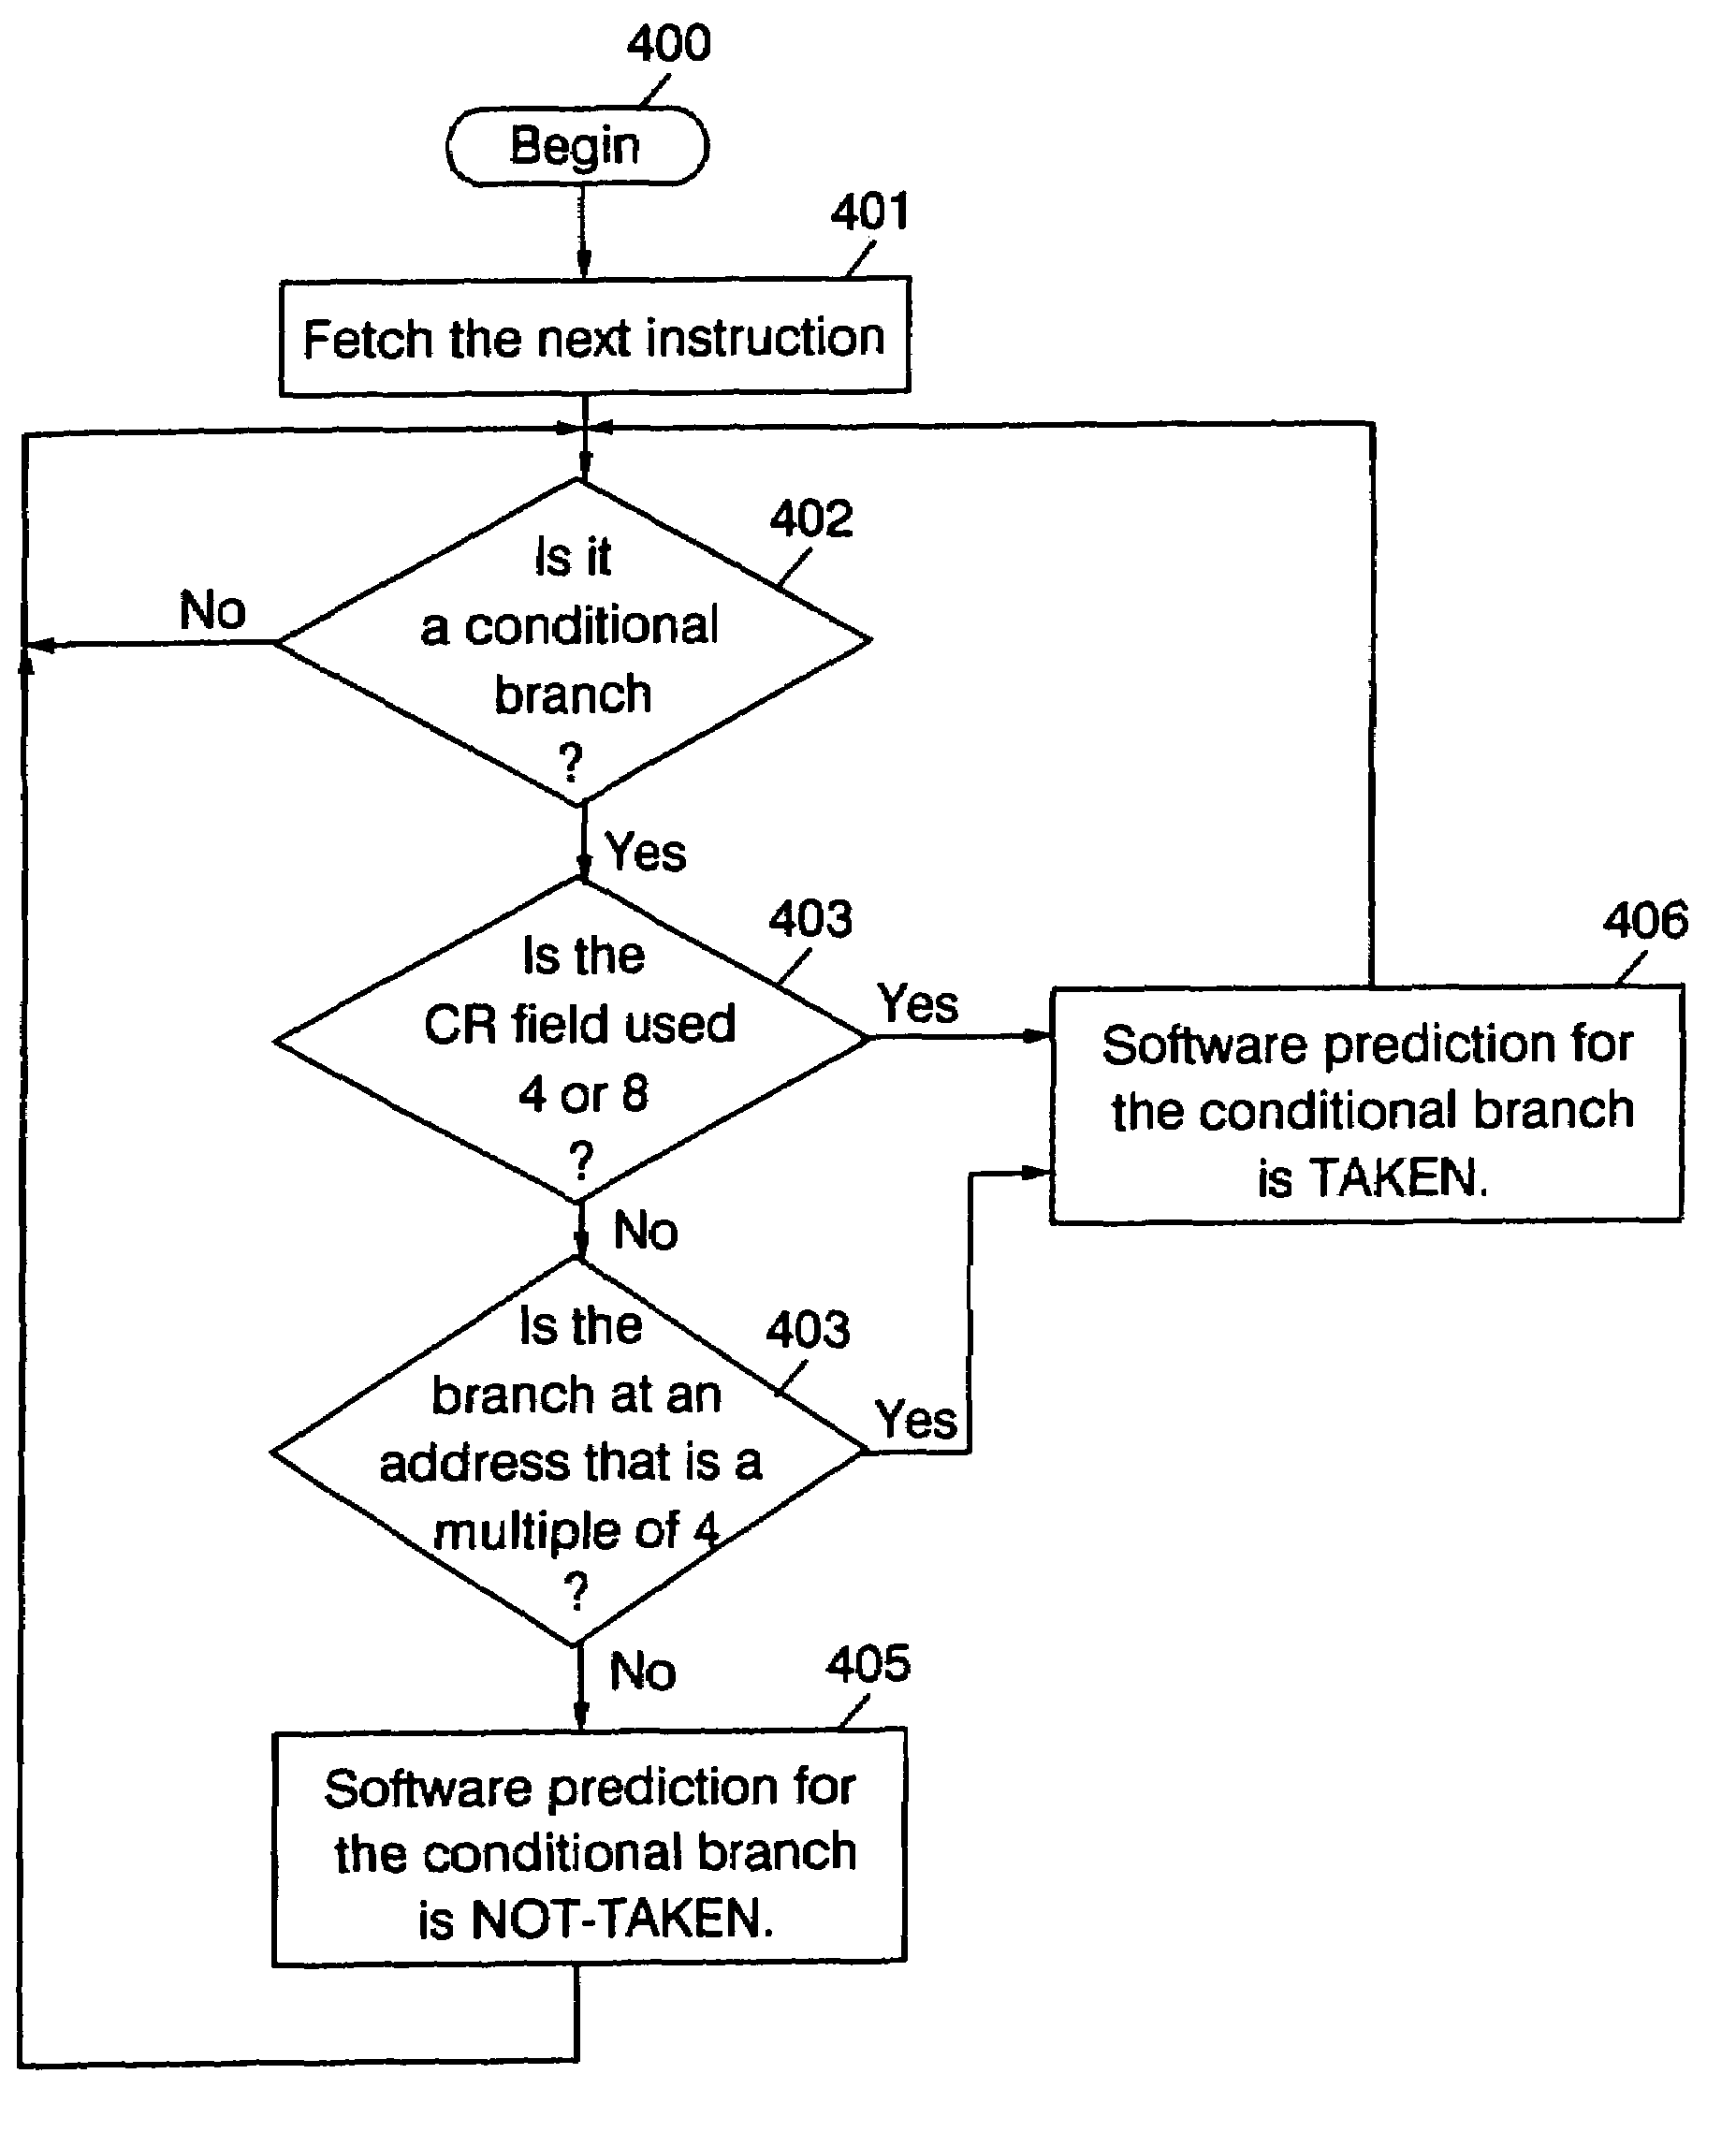 Use of software hint for branch prediction in the absence of hint bit in the branch instruction